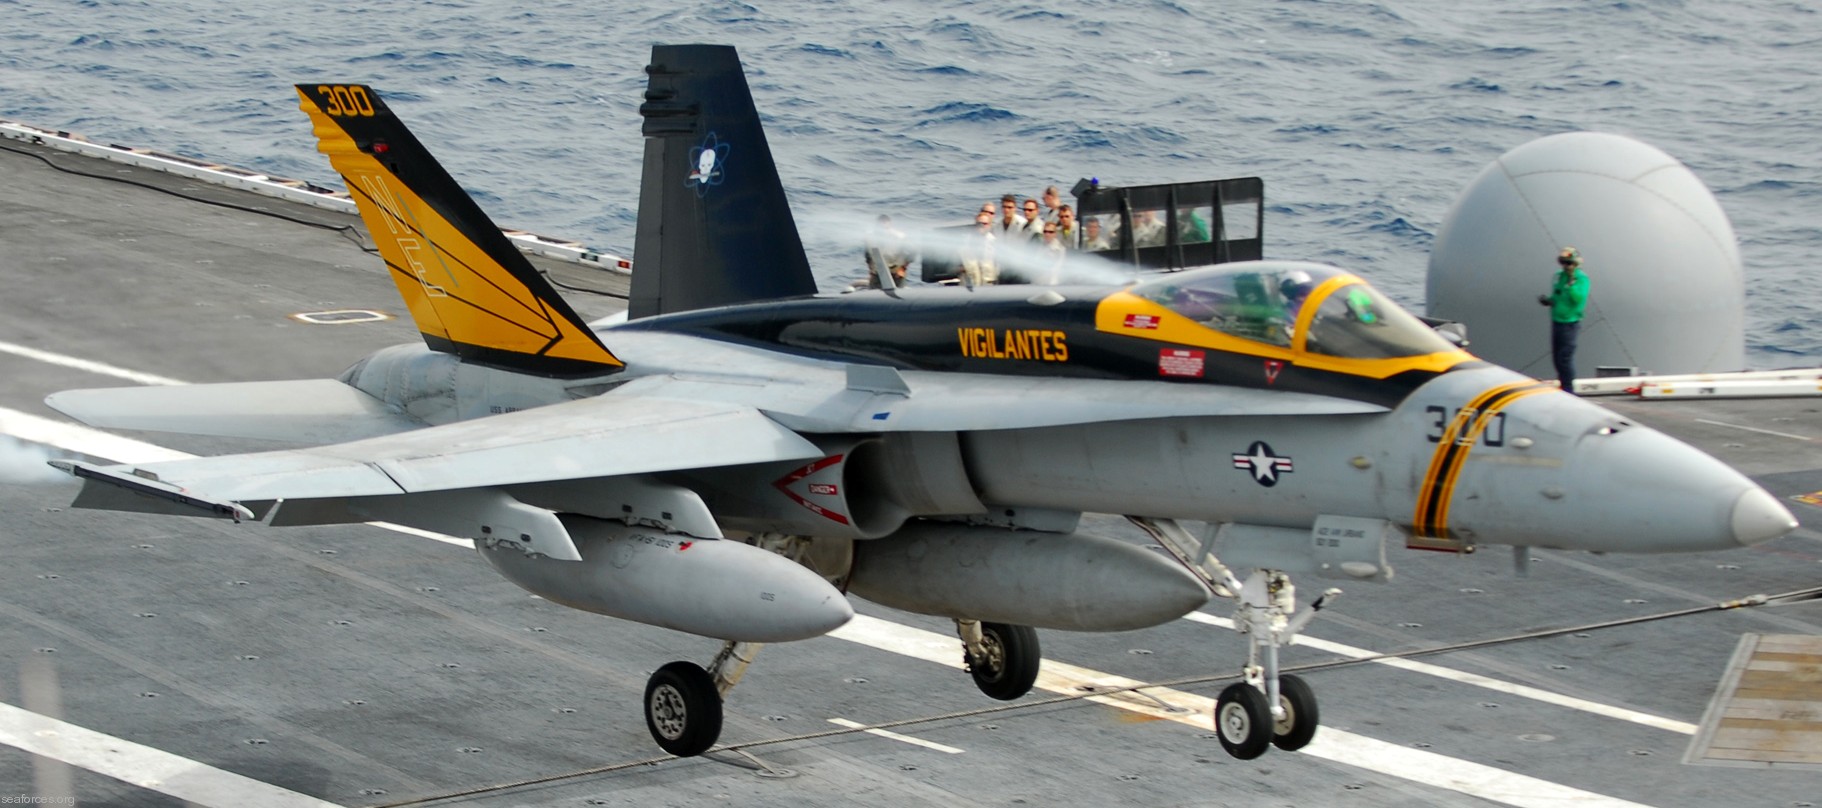 vfa-151 vigilantes strike fighter squadron navy f/a-18c hornet carrier air wing cvw-2 uss abraham lincoln cvn-72 48 special color